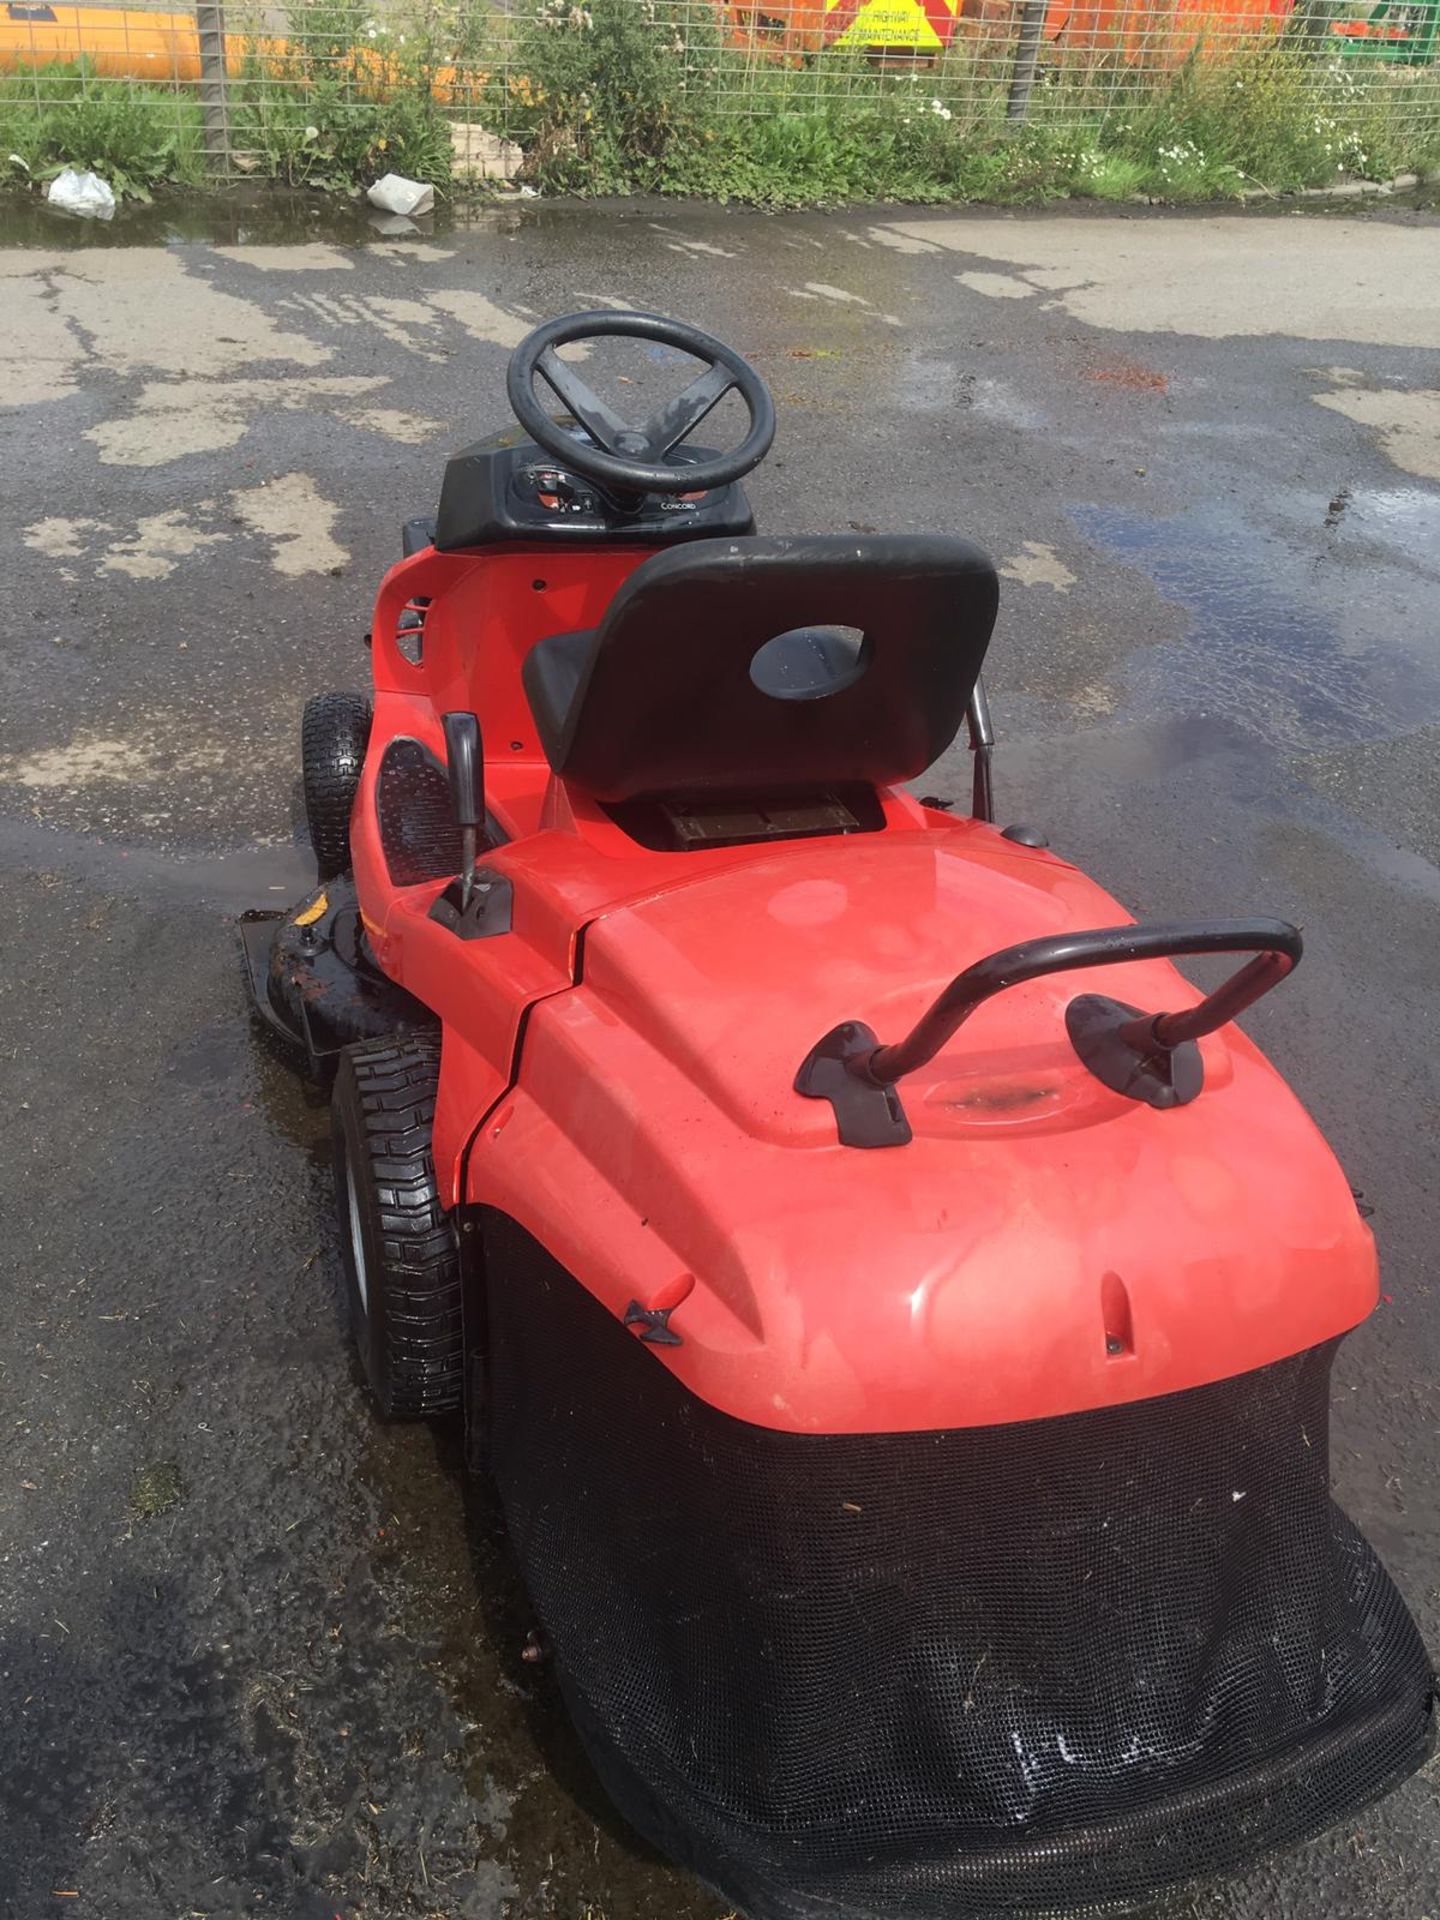 AL-KO T15-102 HD RIDE ON LAWN MOWER, 225 KG, YEAR 2002, C/W REAR GRASS COLLECTOR, 11.5HP I/C ENGINE - Image 3 of 11